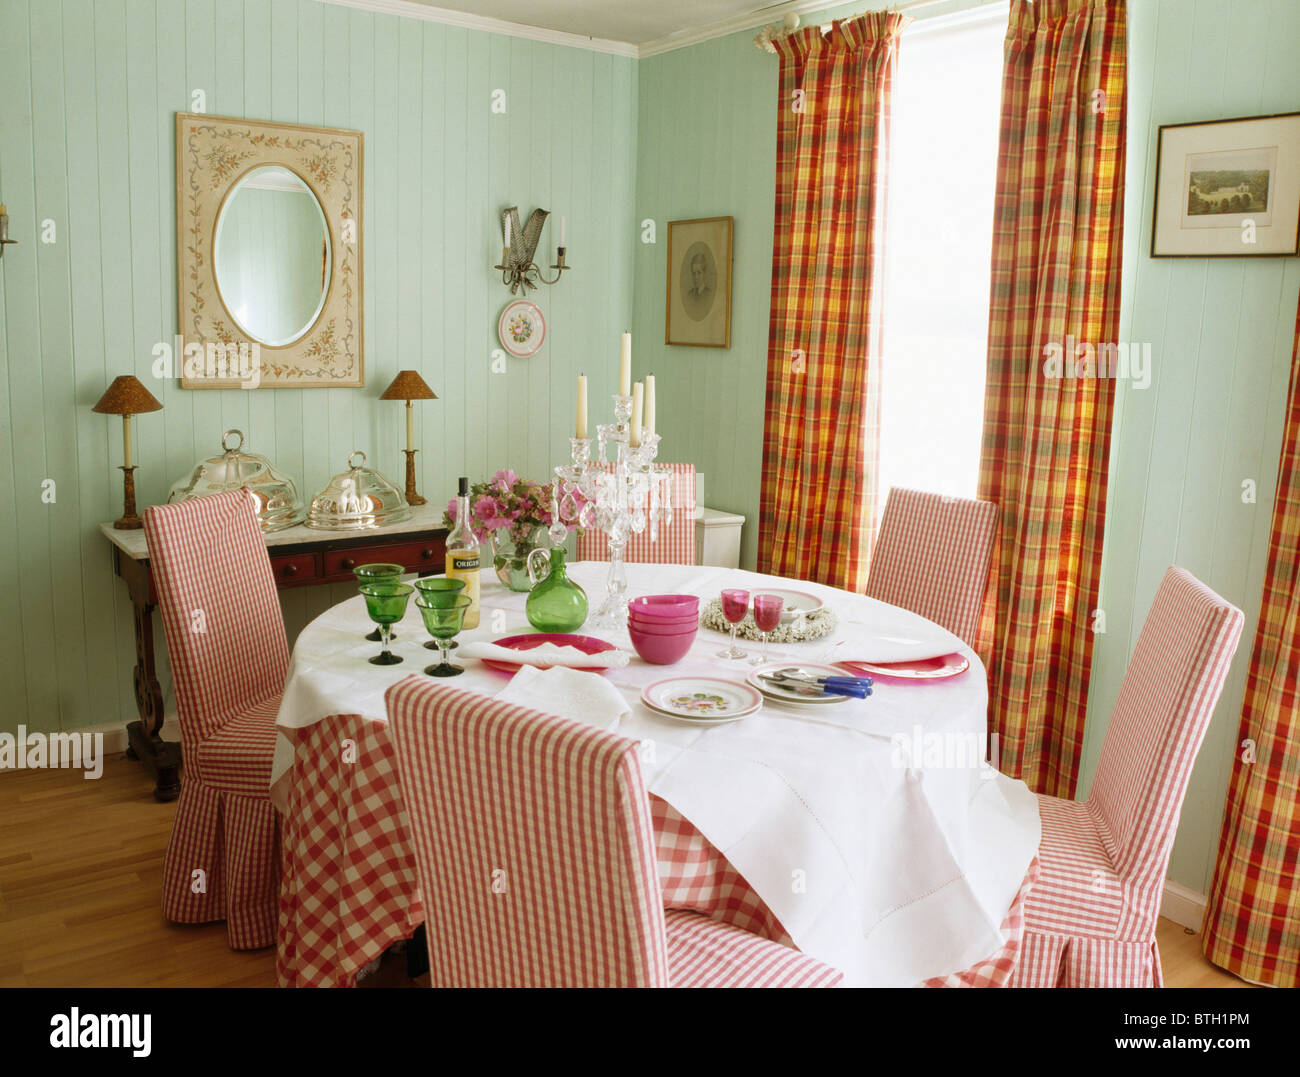 Red checked loose-covers on chairs at table with white linen cloth in pale green dining room with orange-checked curtains Stock Photo